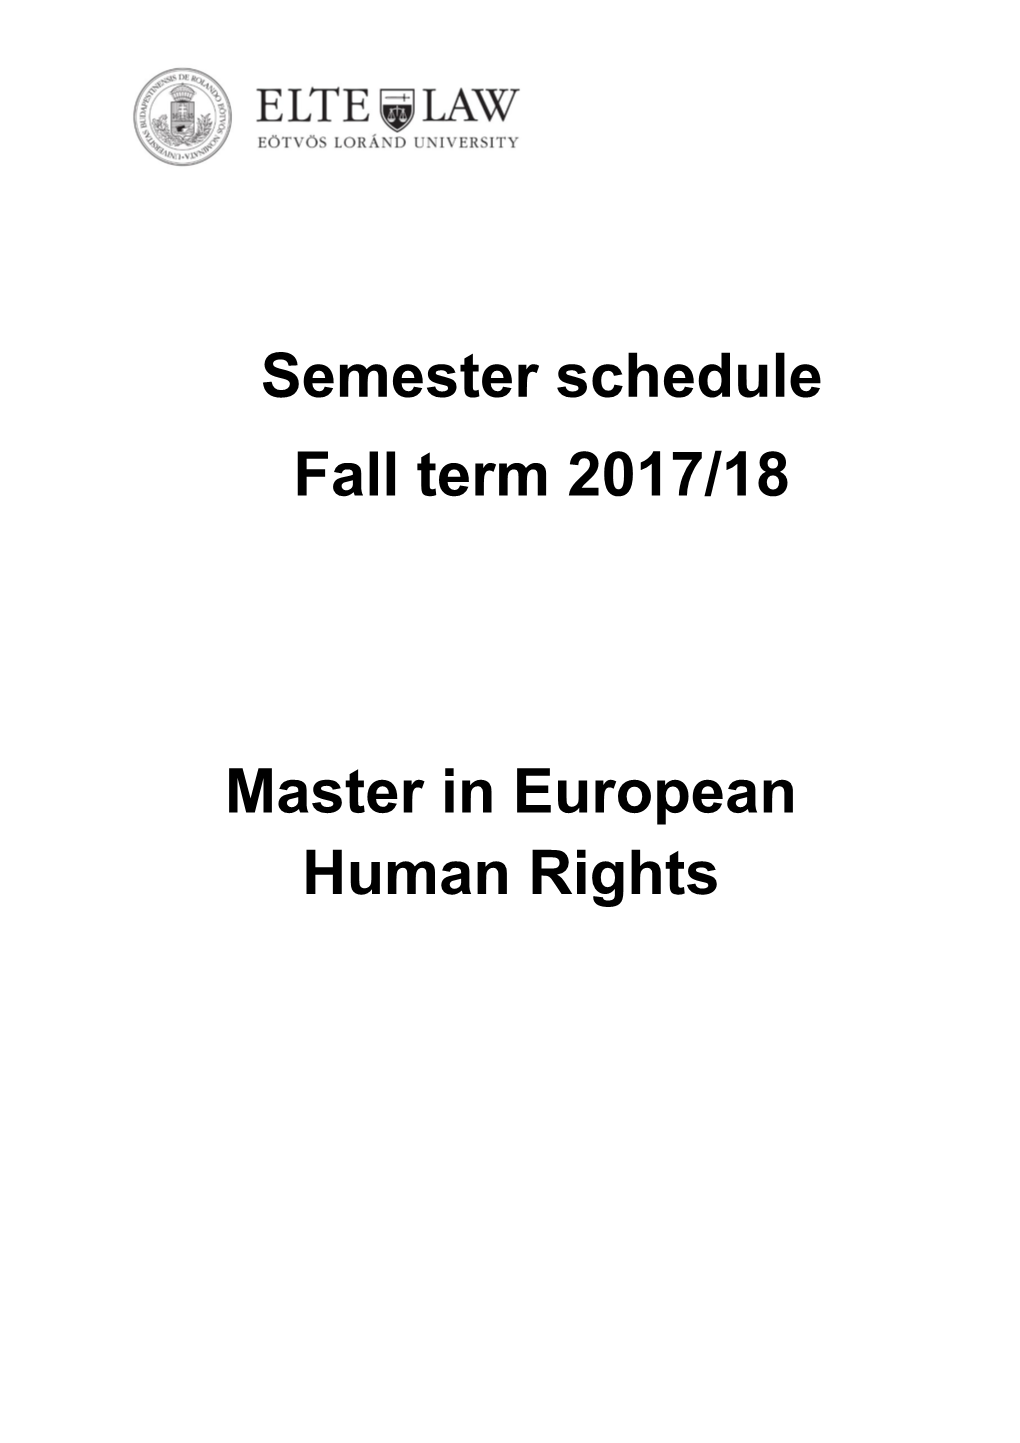 Master in European Human Rights